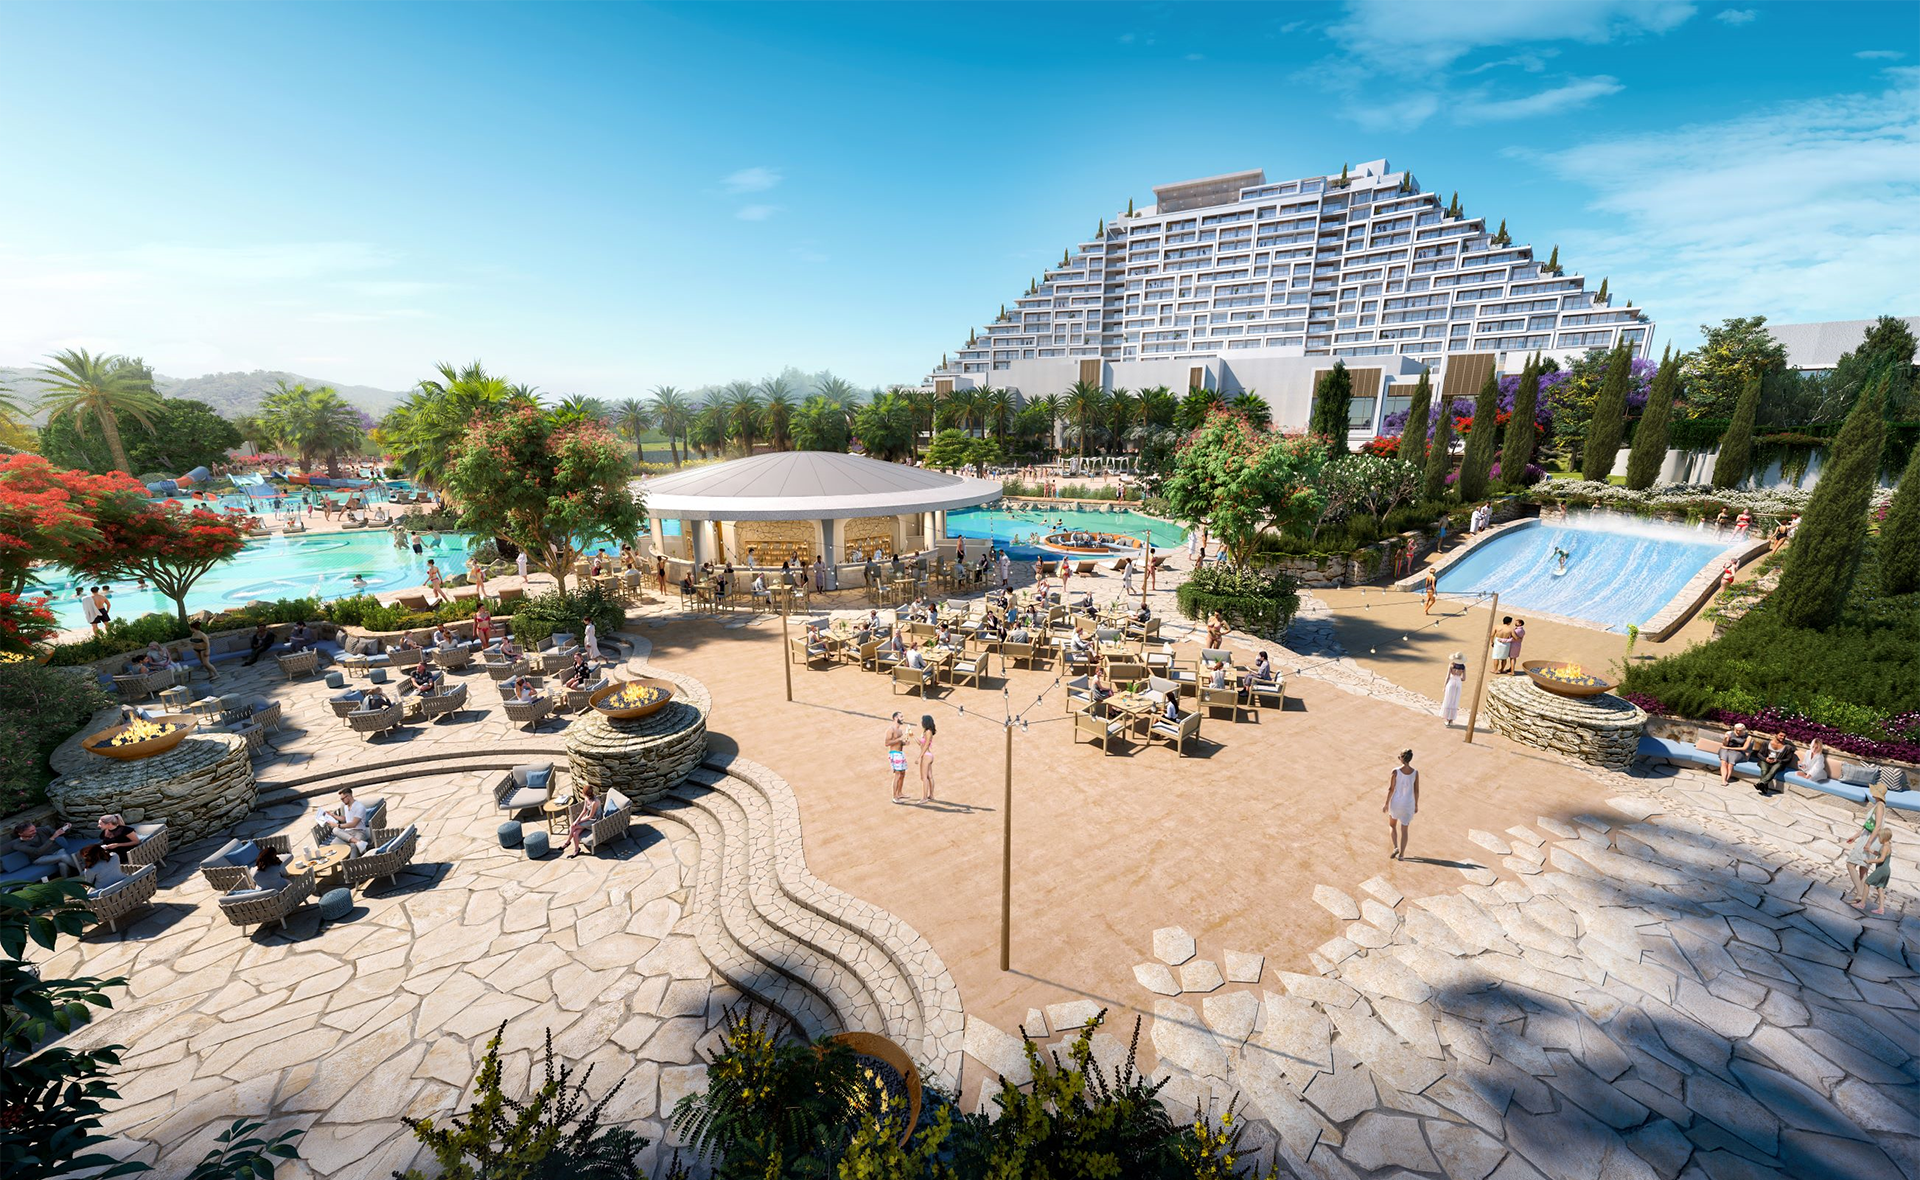 Limitless luxury at City of Dreams Mediterranean, Europe's premier integrated casino resort